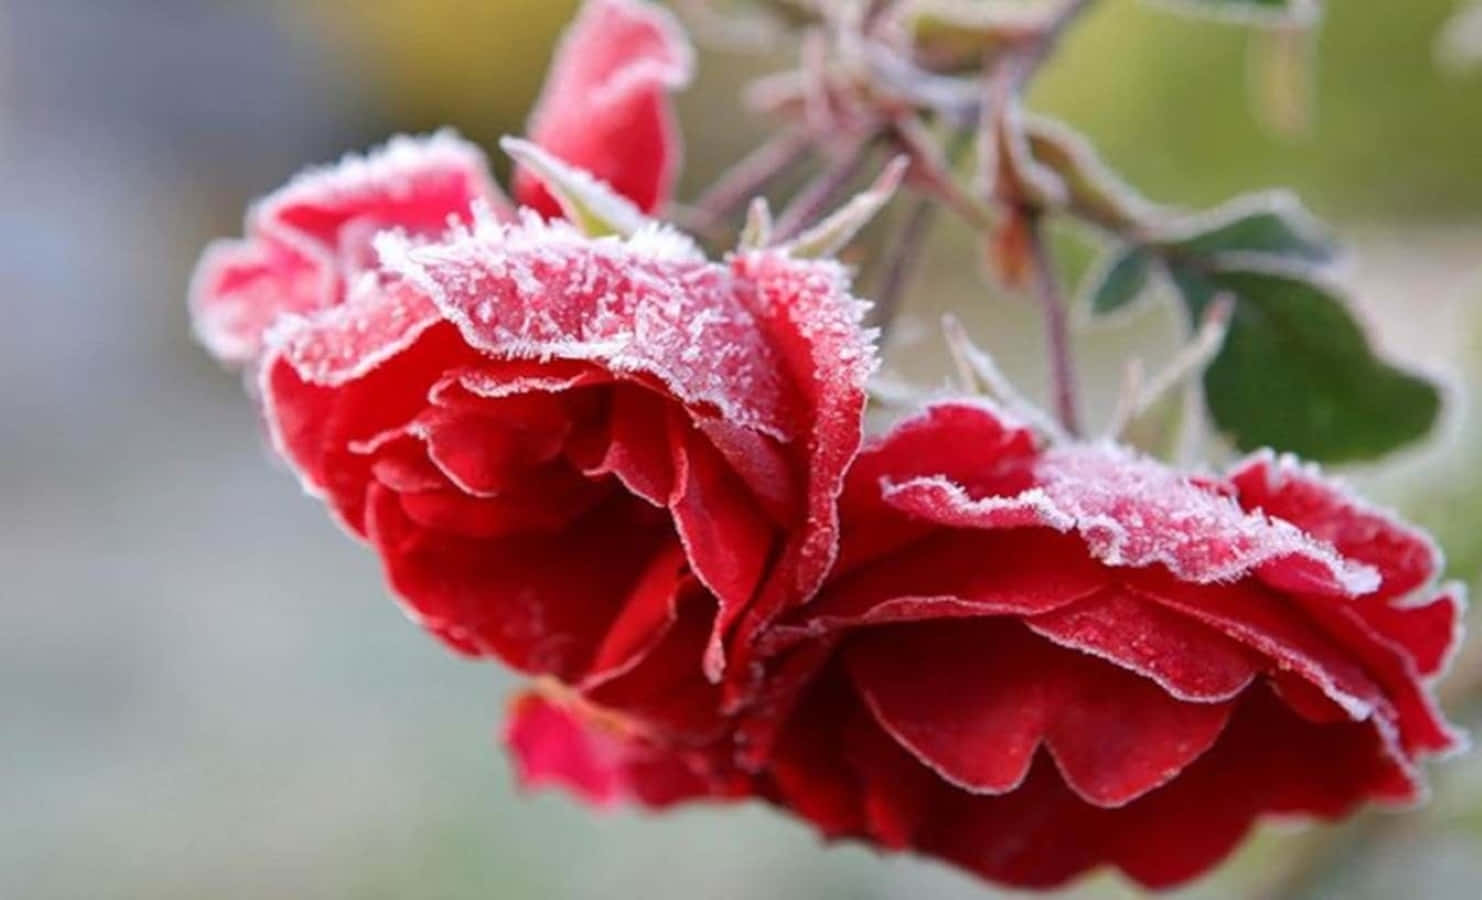 A vibrant display of winter flowers in frosty nature Wallpaper